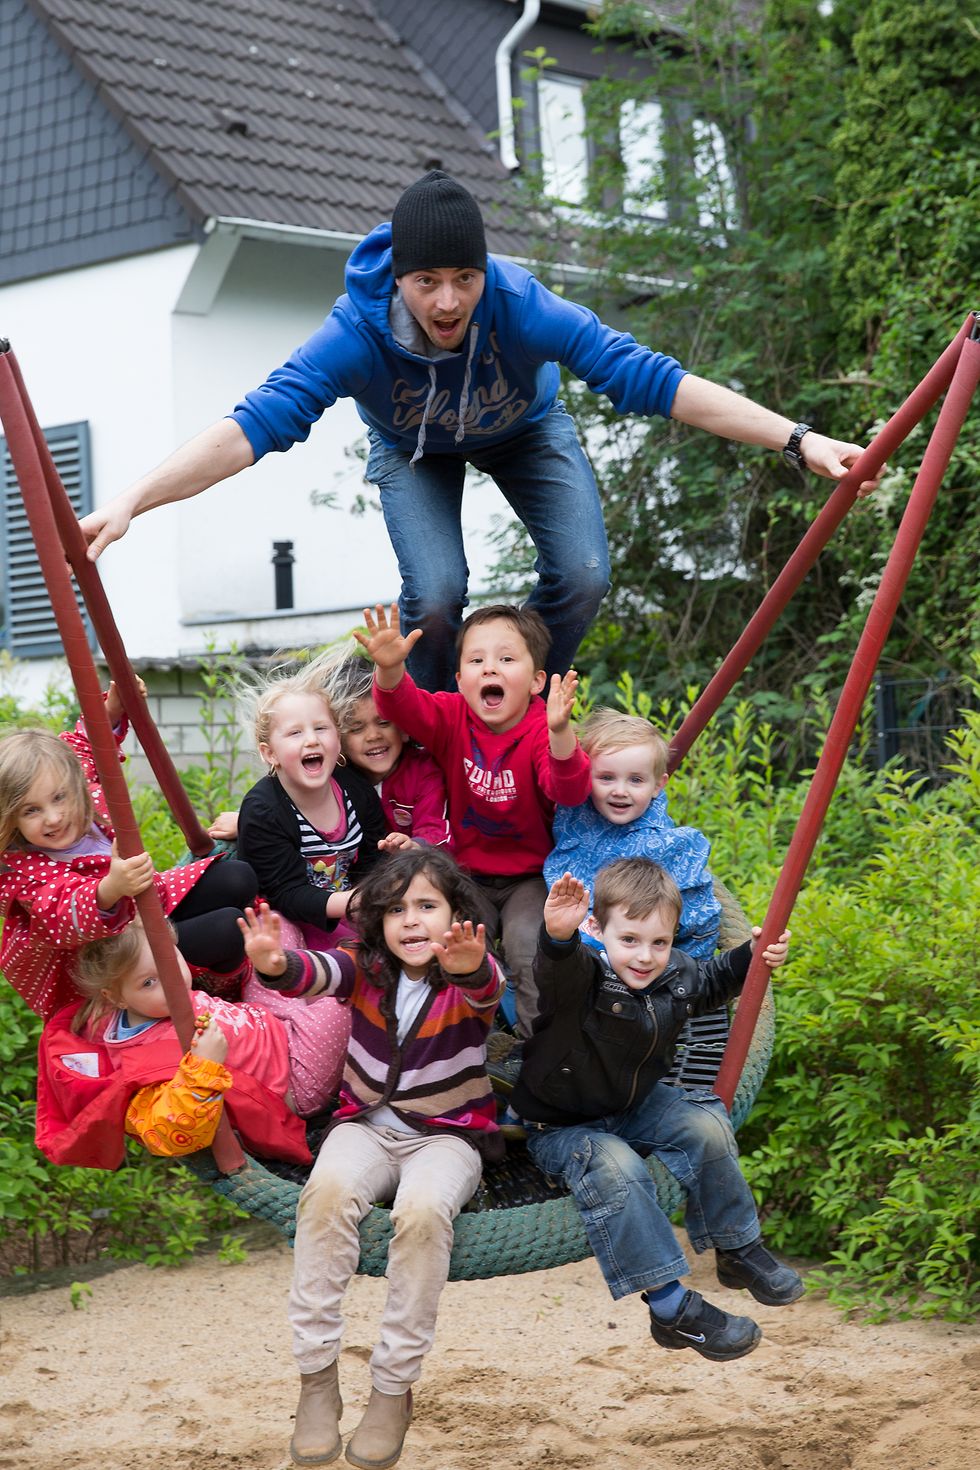 MIT Photo Competition 2014: Children on a swing set in a preschool parent's council in Germany